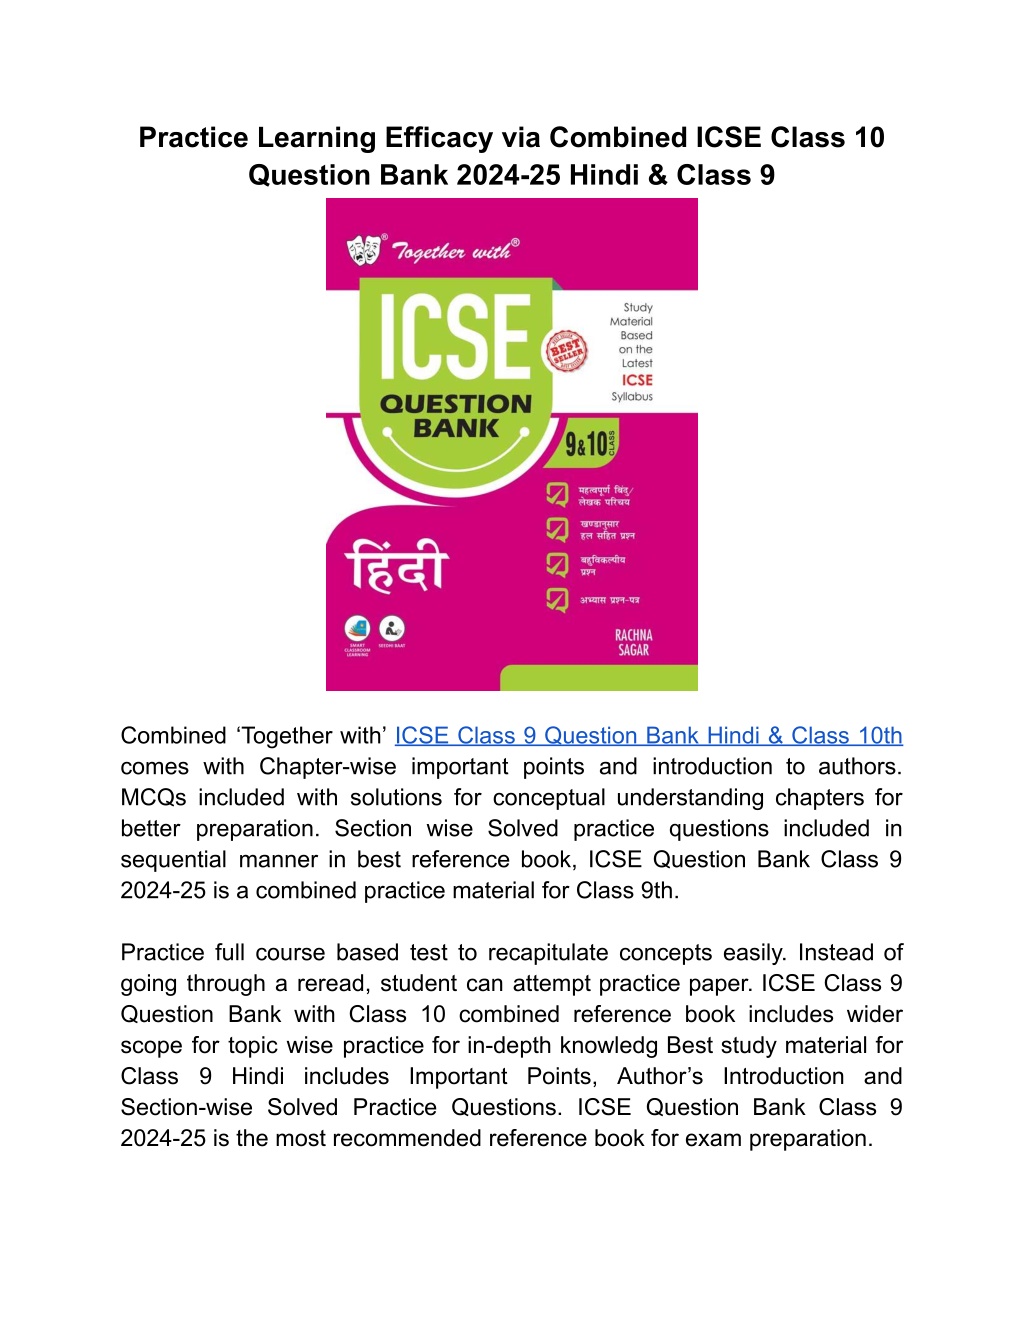 practice learning efficacy via combined icse l.w